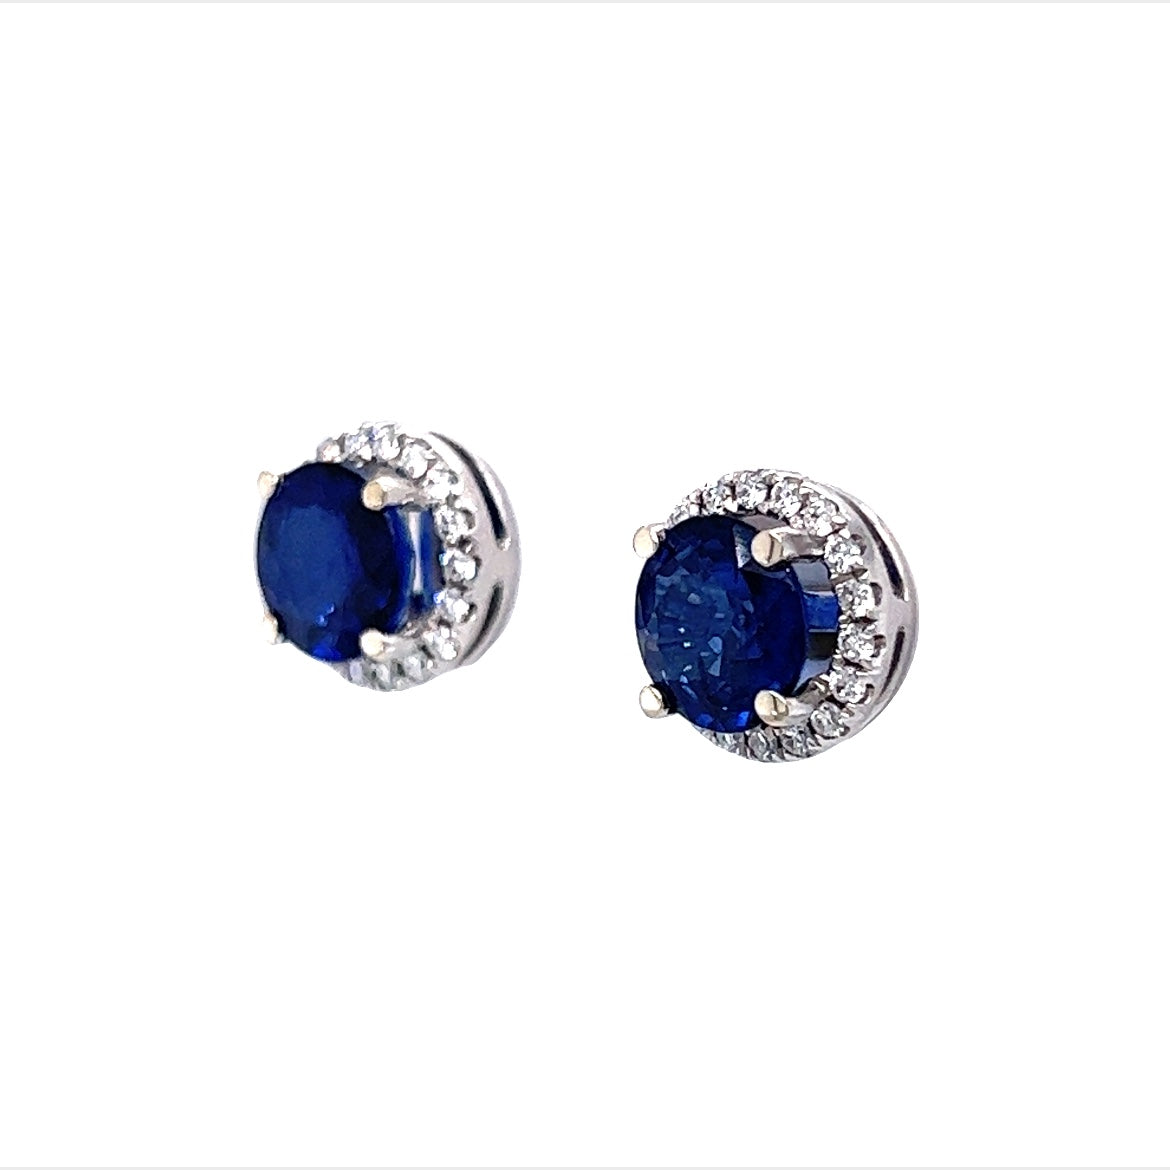 Round Cut Sapphire Stud Earrings with Diamond Halo in 14K White Gold